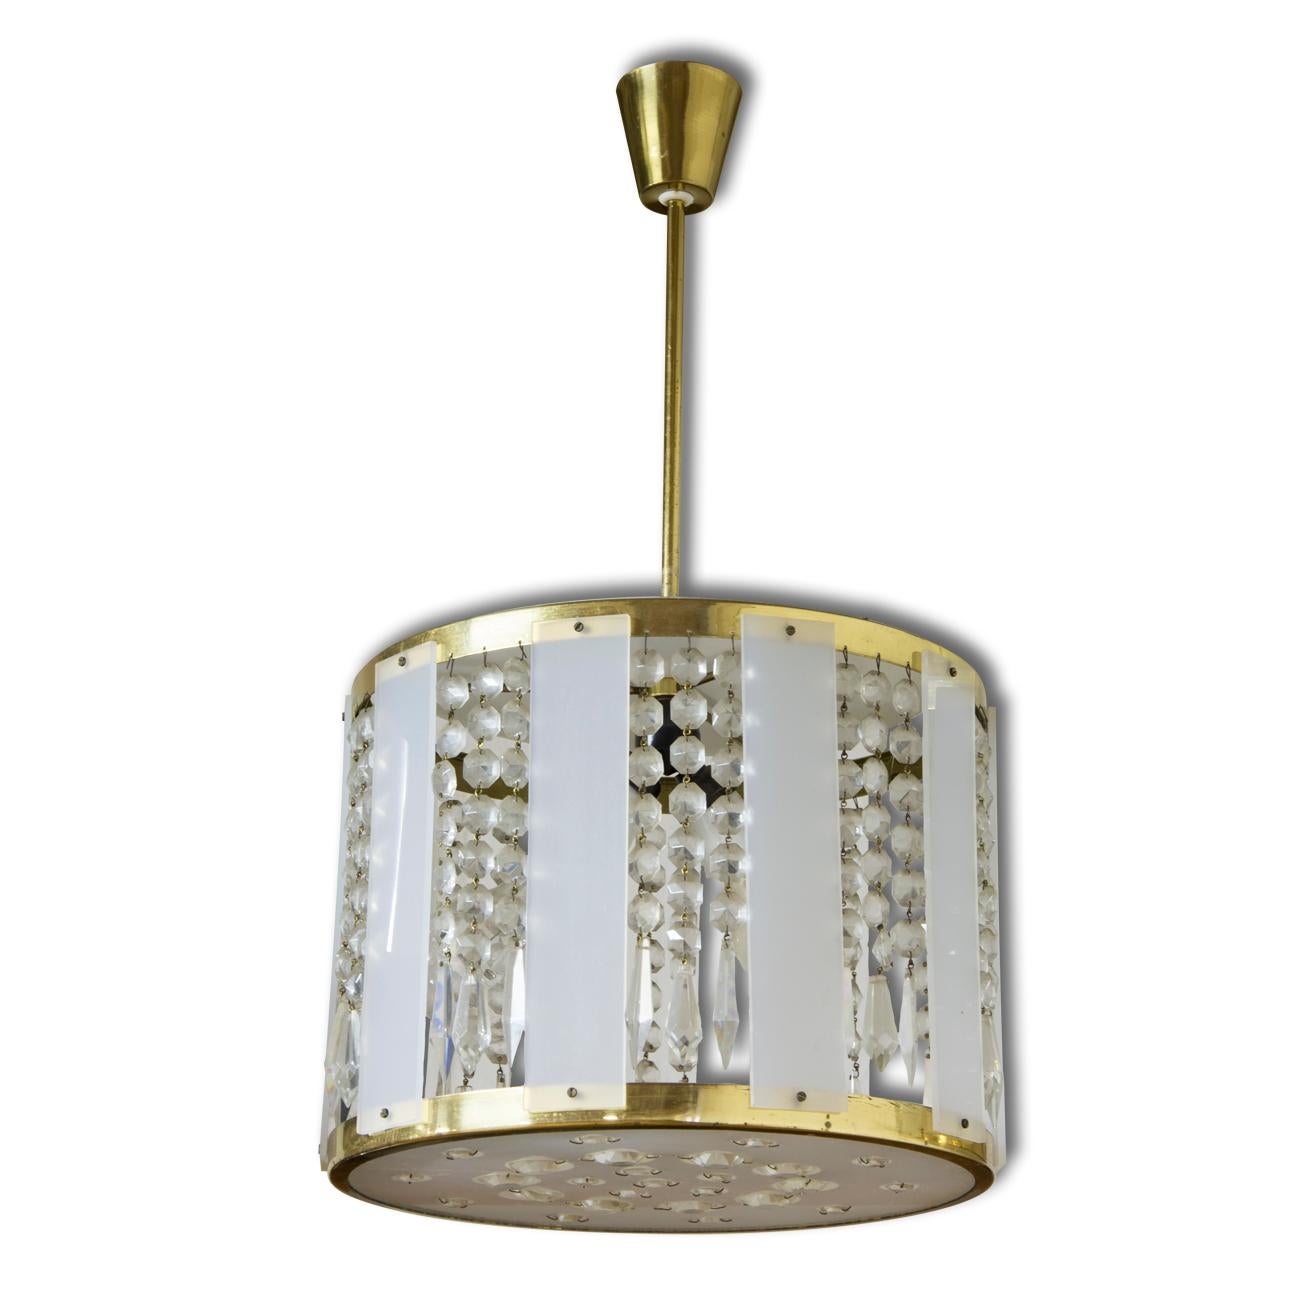 Czechoslovak crystal chandeliers, made in the 1970s. An excellent quality piece, it features a cut glass beads and pendants hanging from the brass centre and slices of plexiglass around the chandelier. In very good vintage condition, consistent with